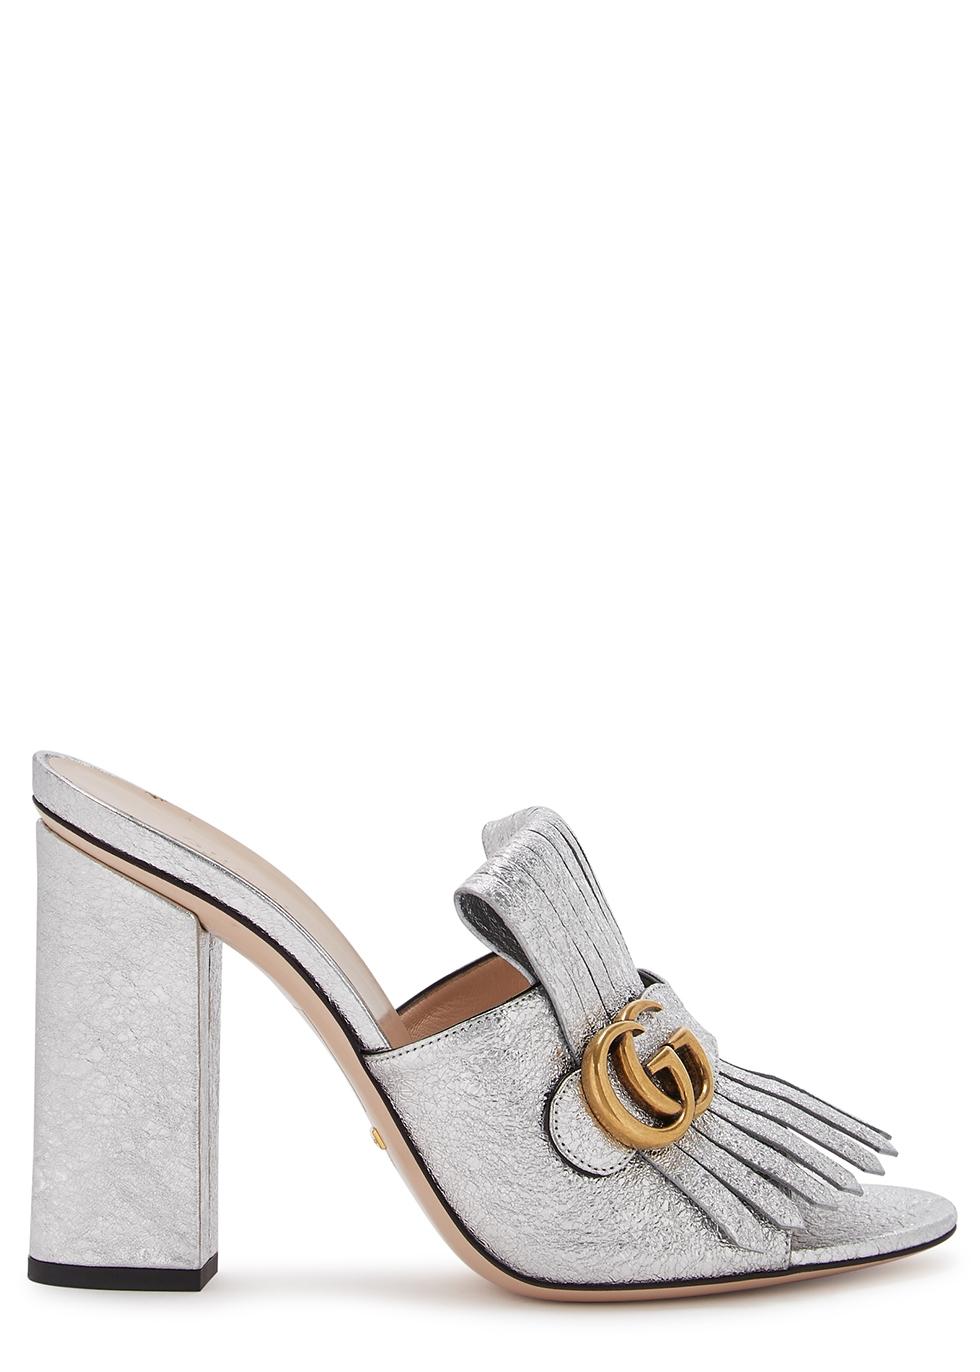 Gucci Leather Marmont Mules in Silver (Metallic) | Lyst